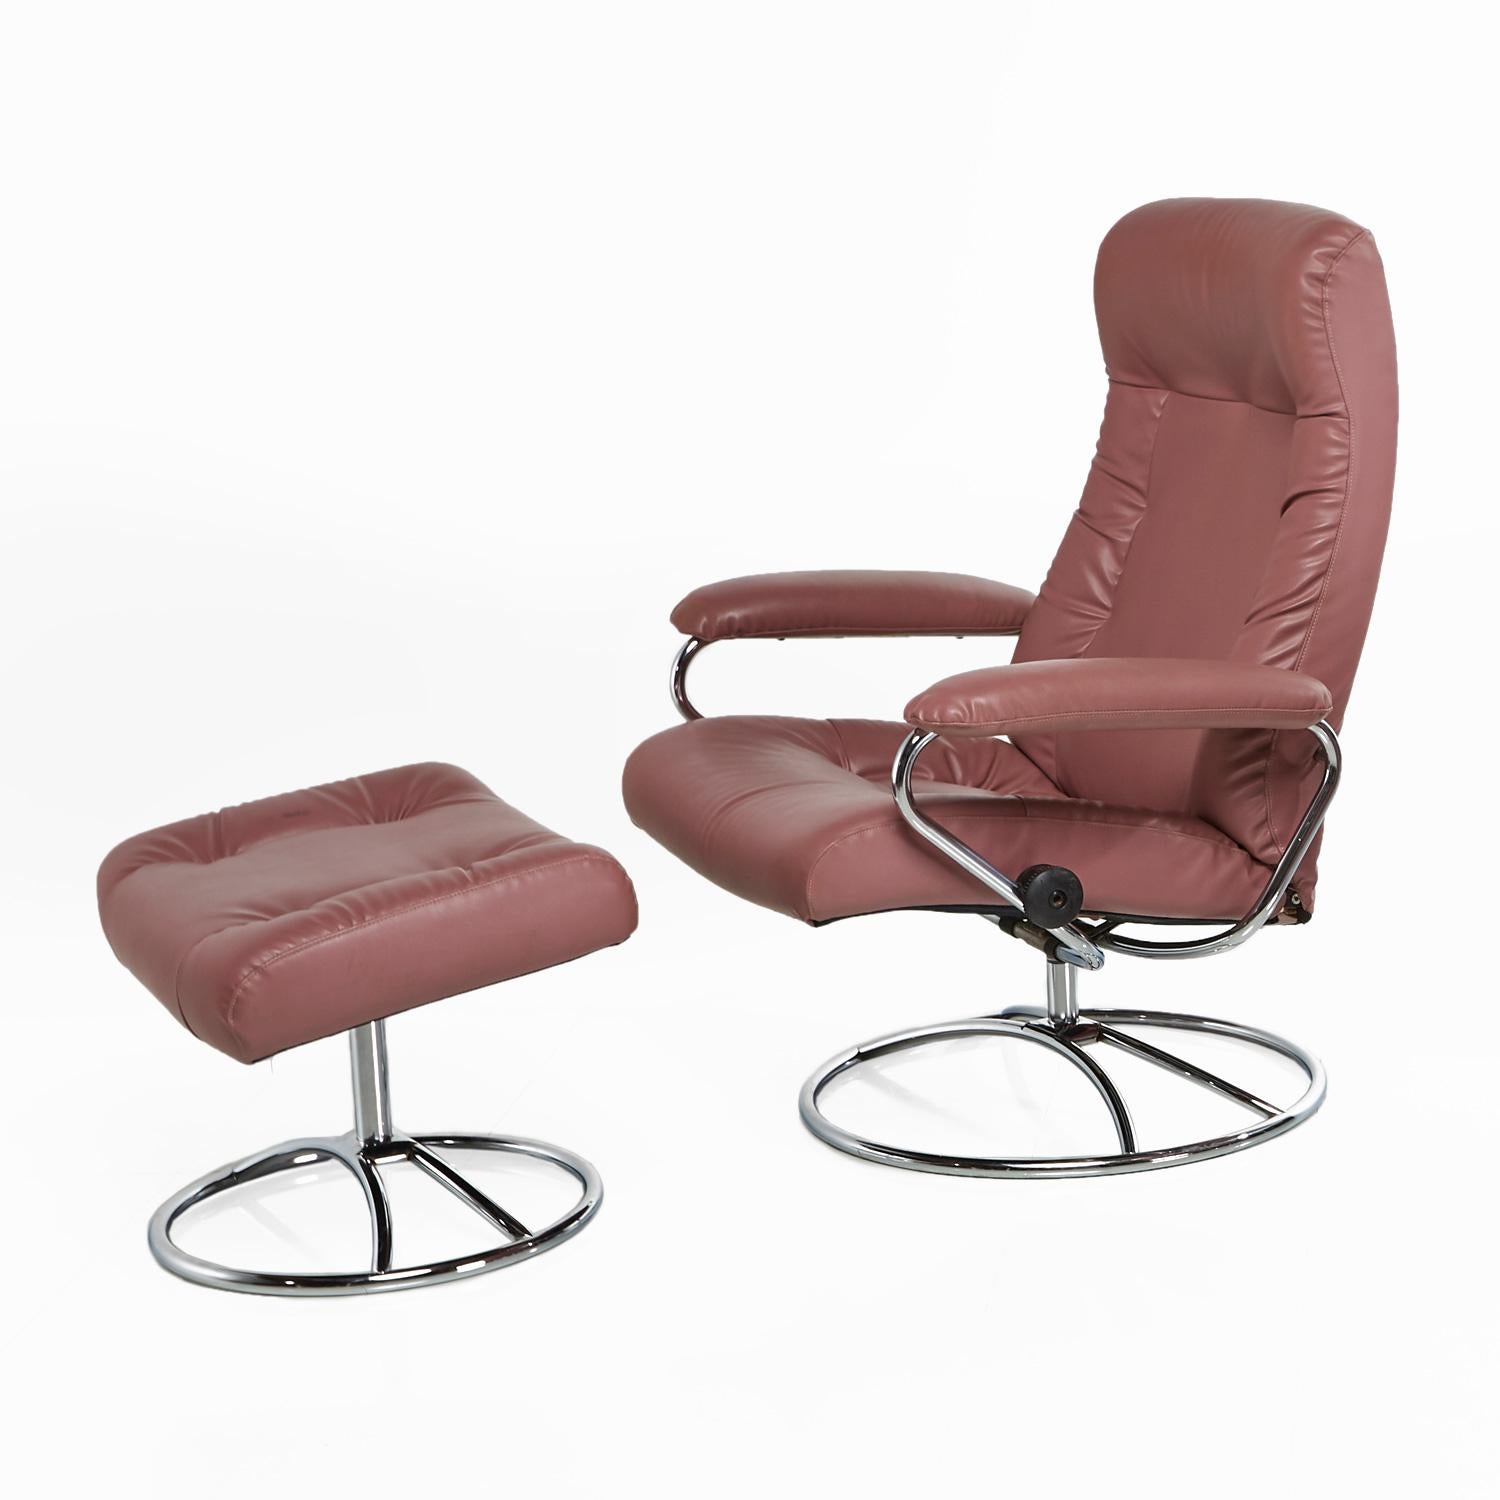 J.E.Ekornes Stressless Recliner Swivel Rose Leather Lounge Chairs and Ottoman In Excellent Condition In Chattanooga, TN